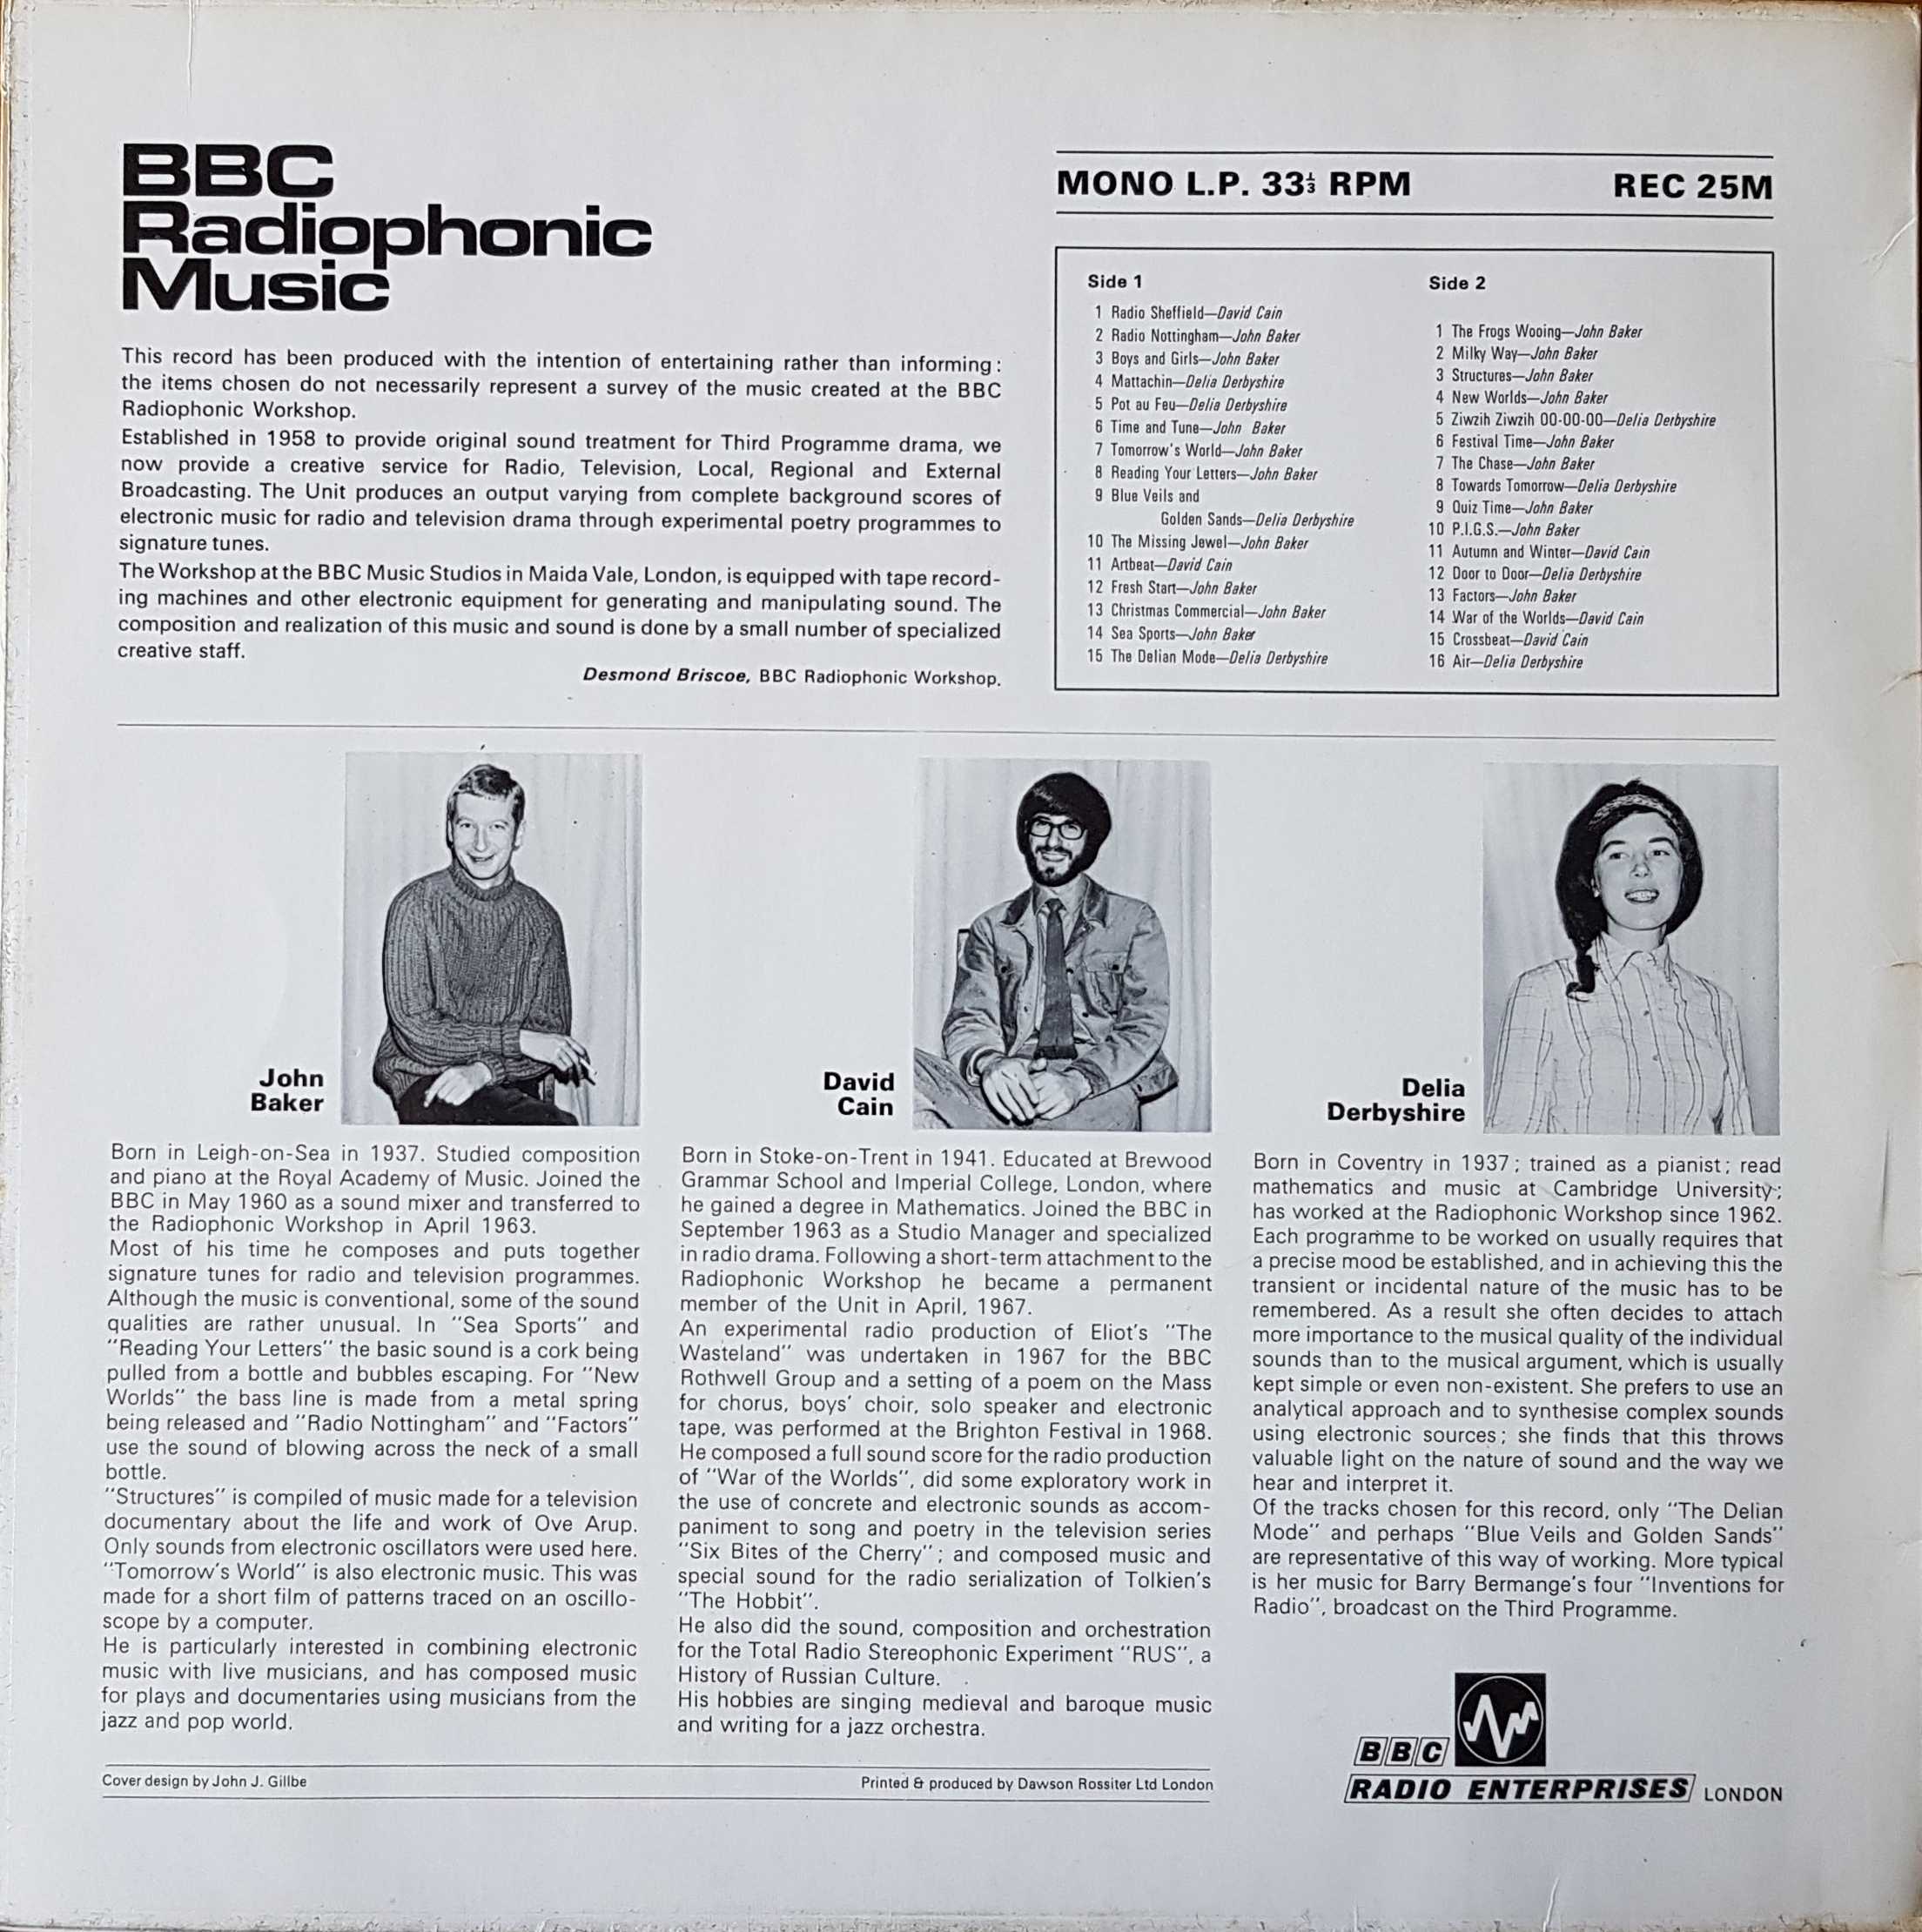 Picture of REC 25 BBC radiophonic music by artist David Cain / John Baker / Delia Derbyshire from the BBC records and Tapes library